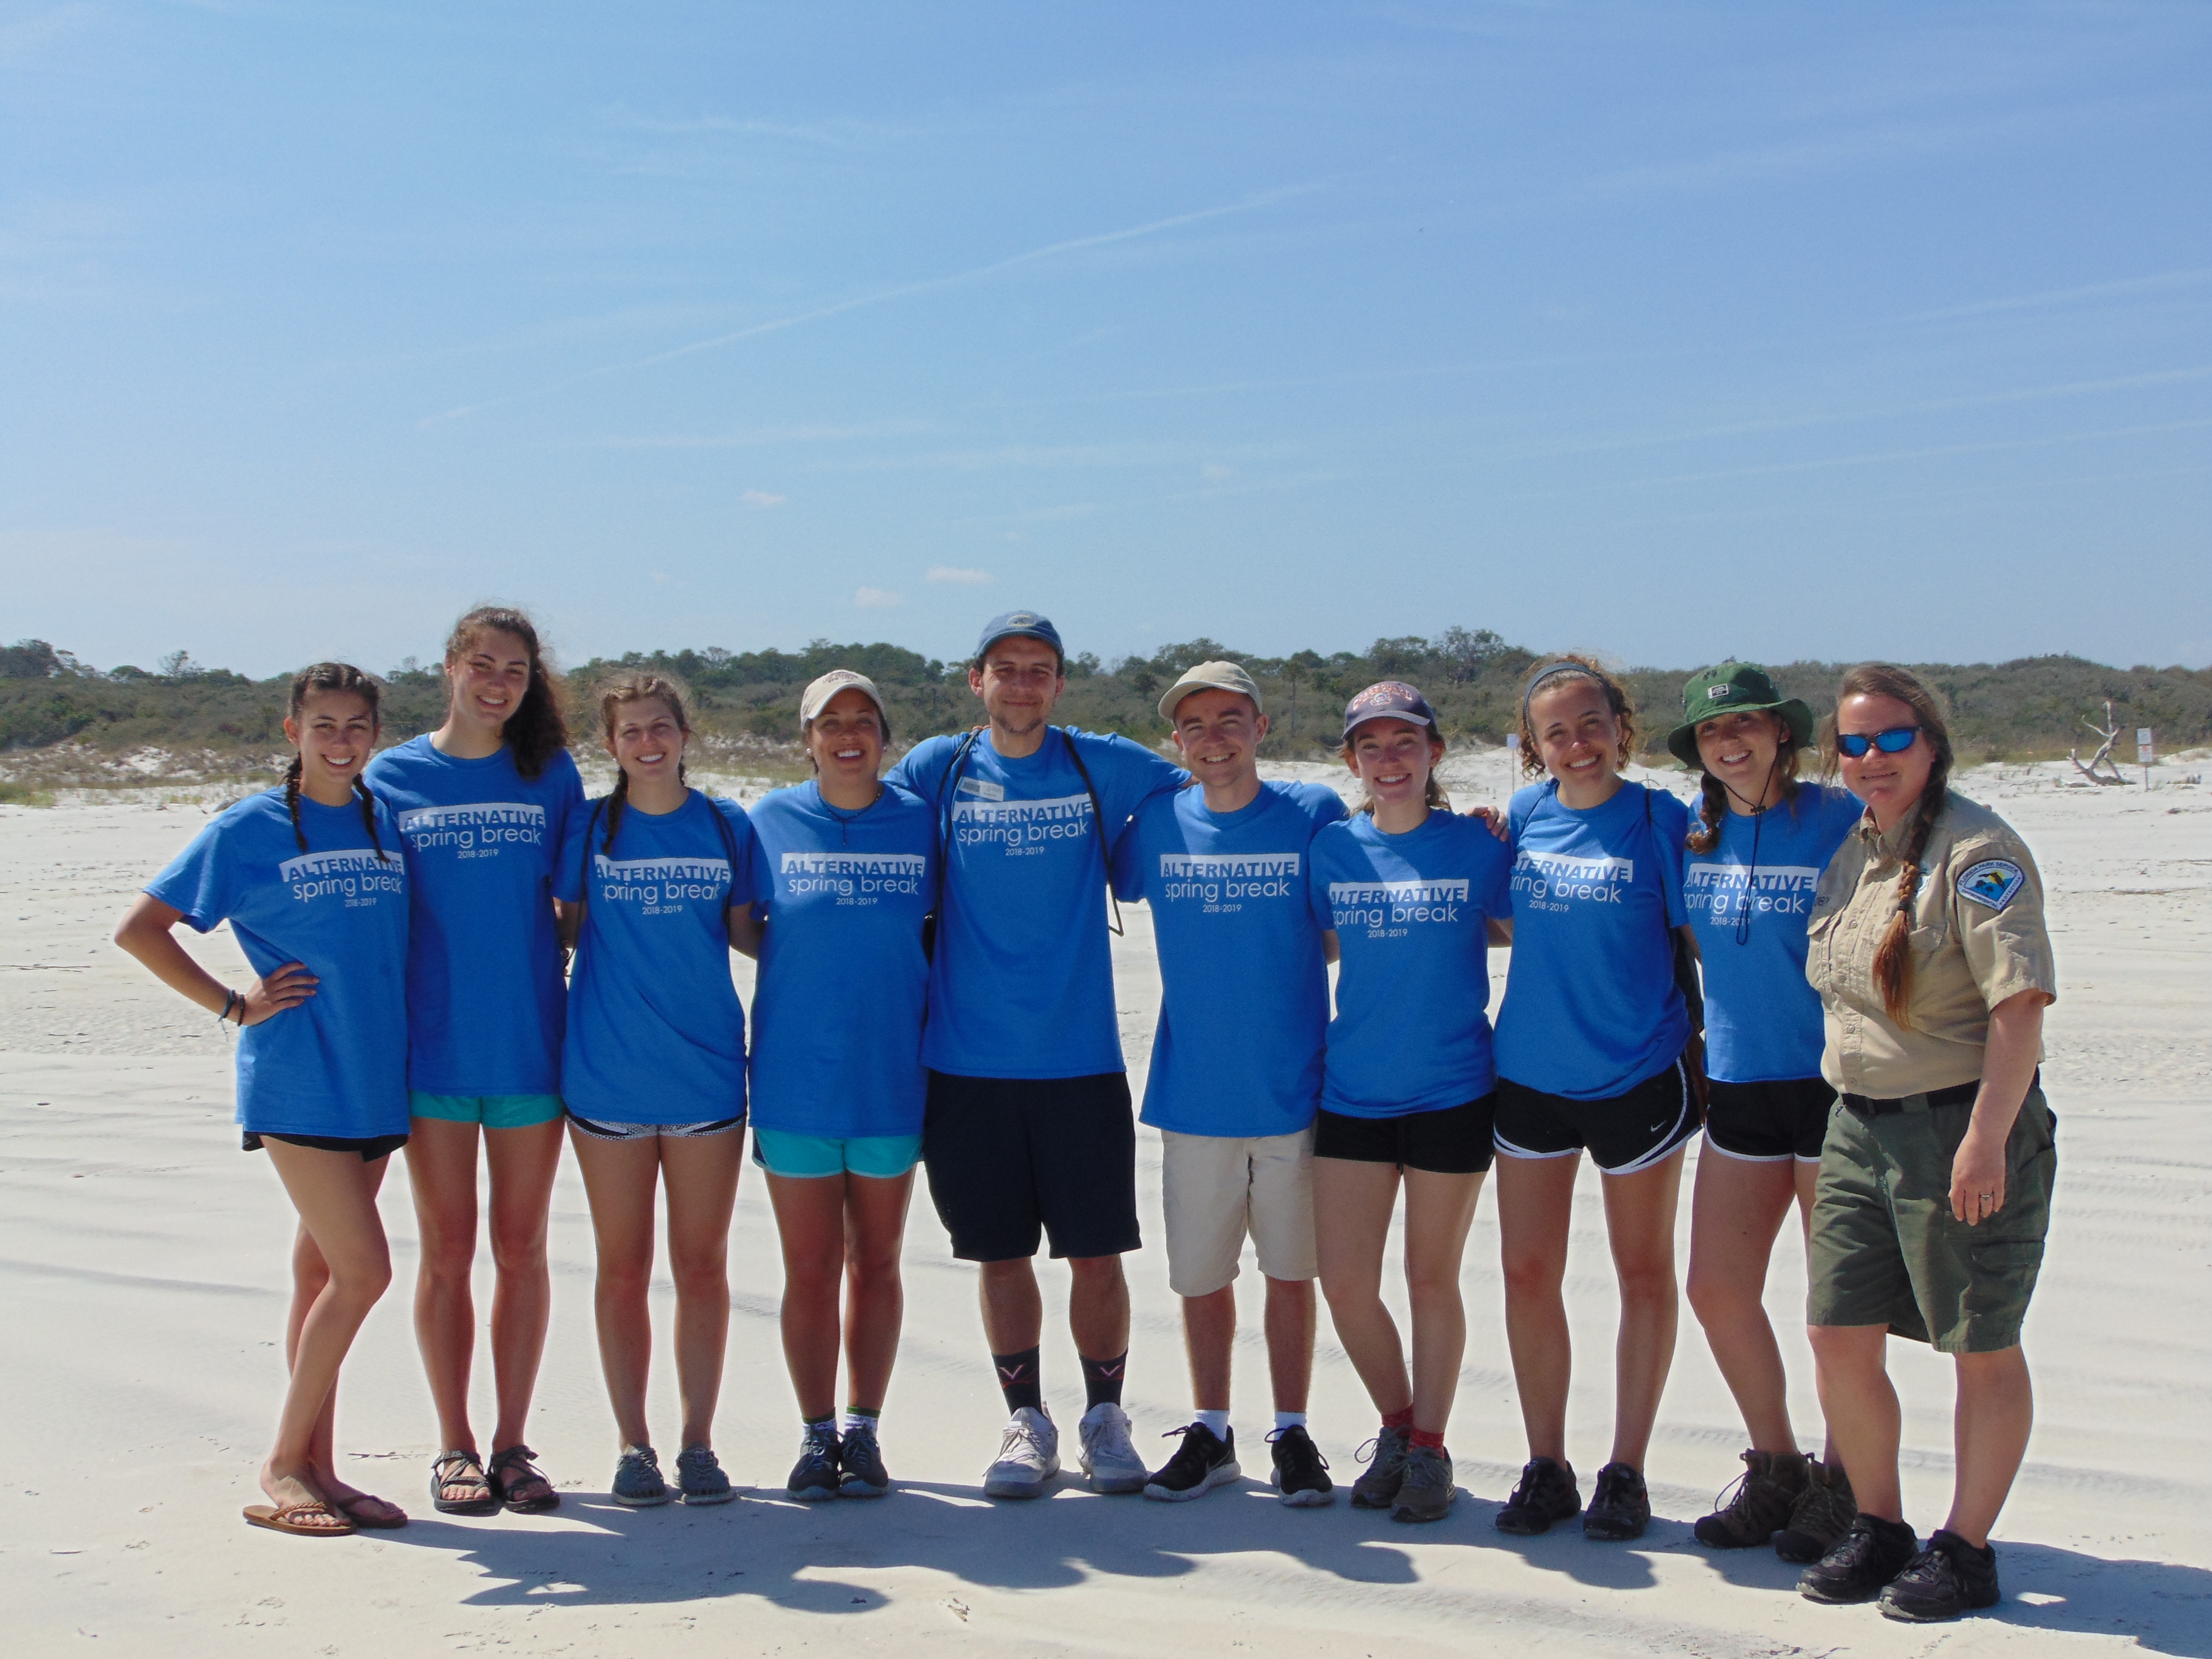 Volunteers pose for a photo with the park ranger at an alt spring break event in Jacksonville.